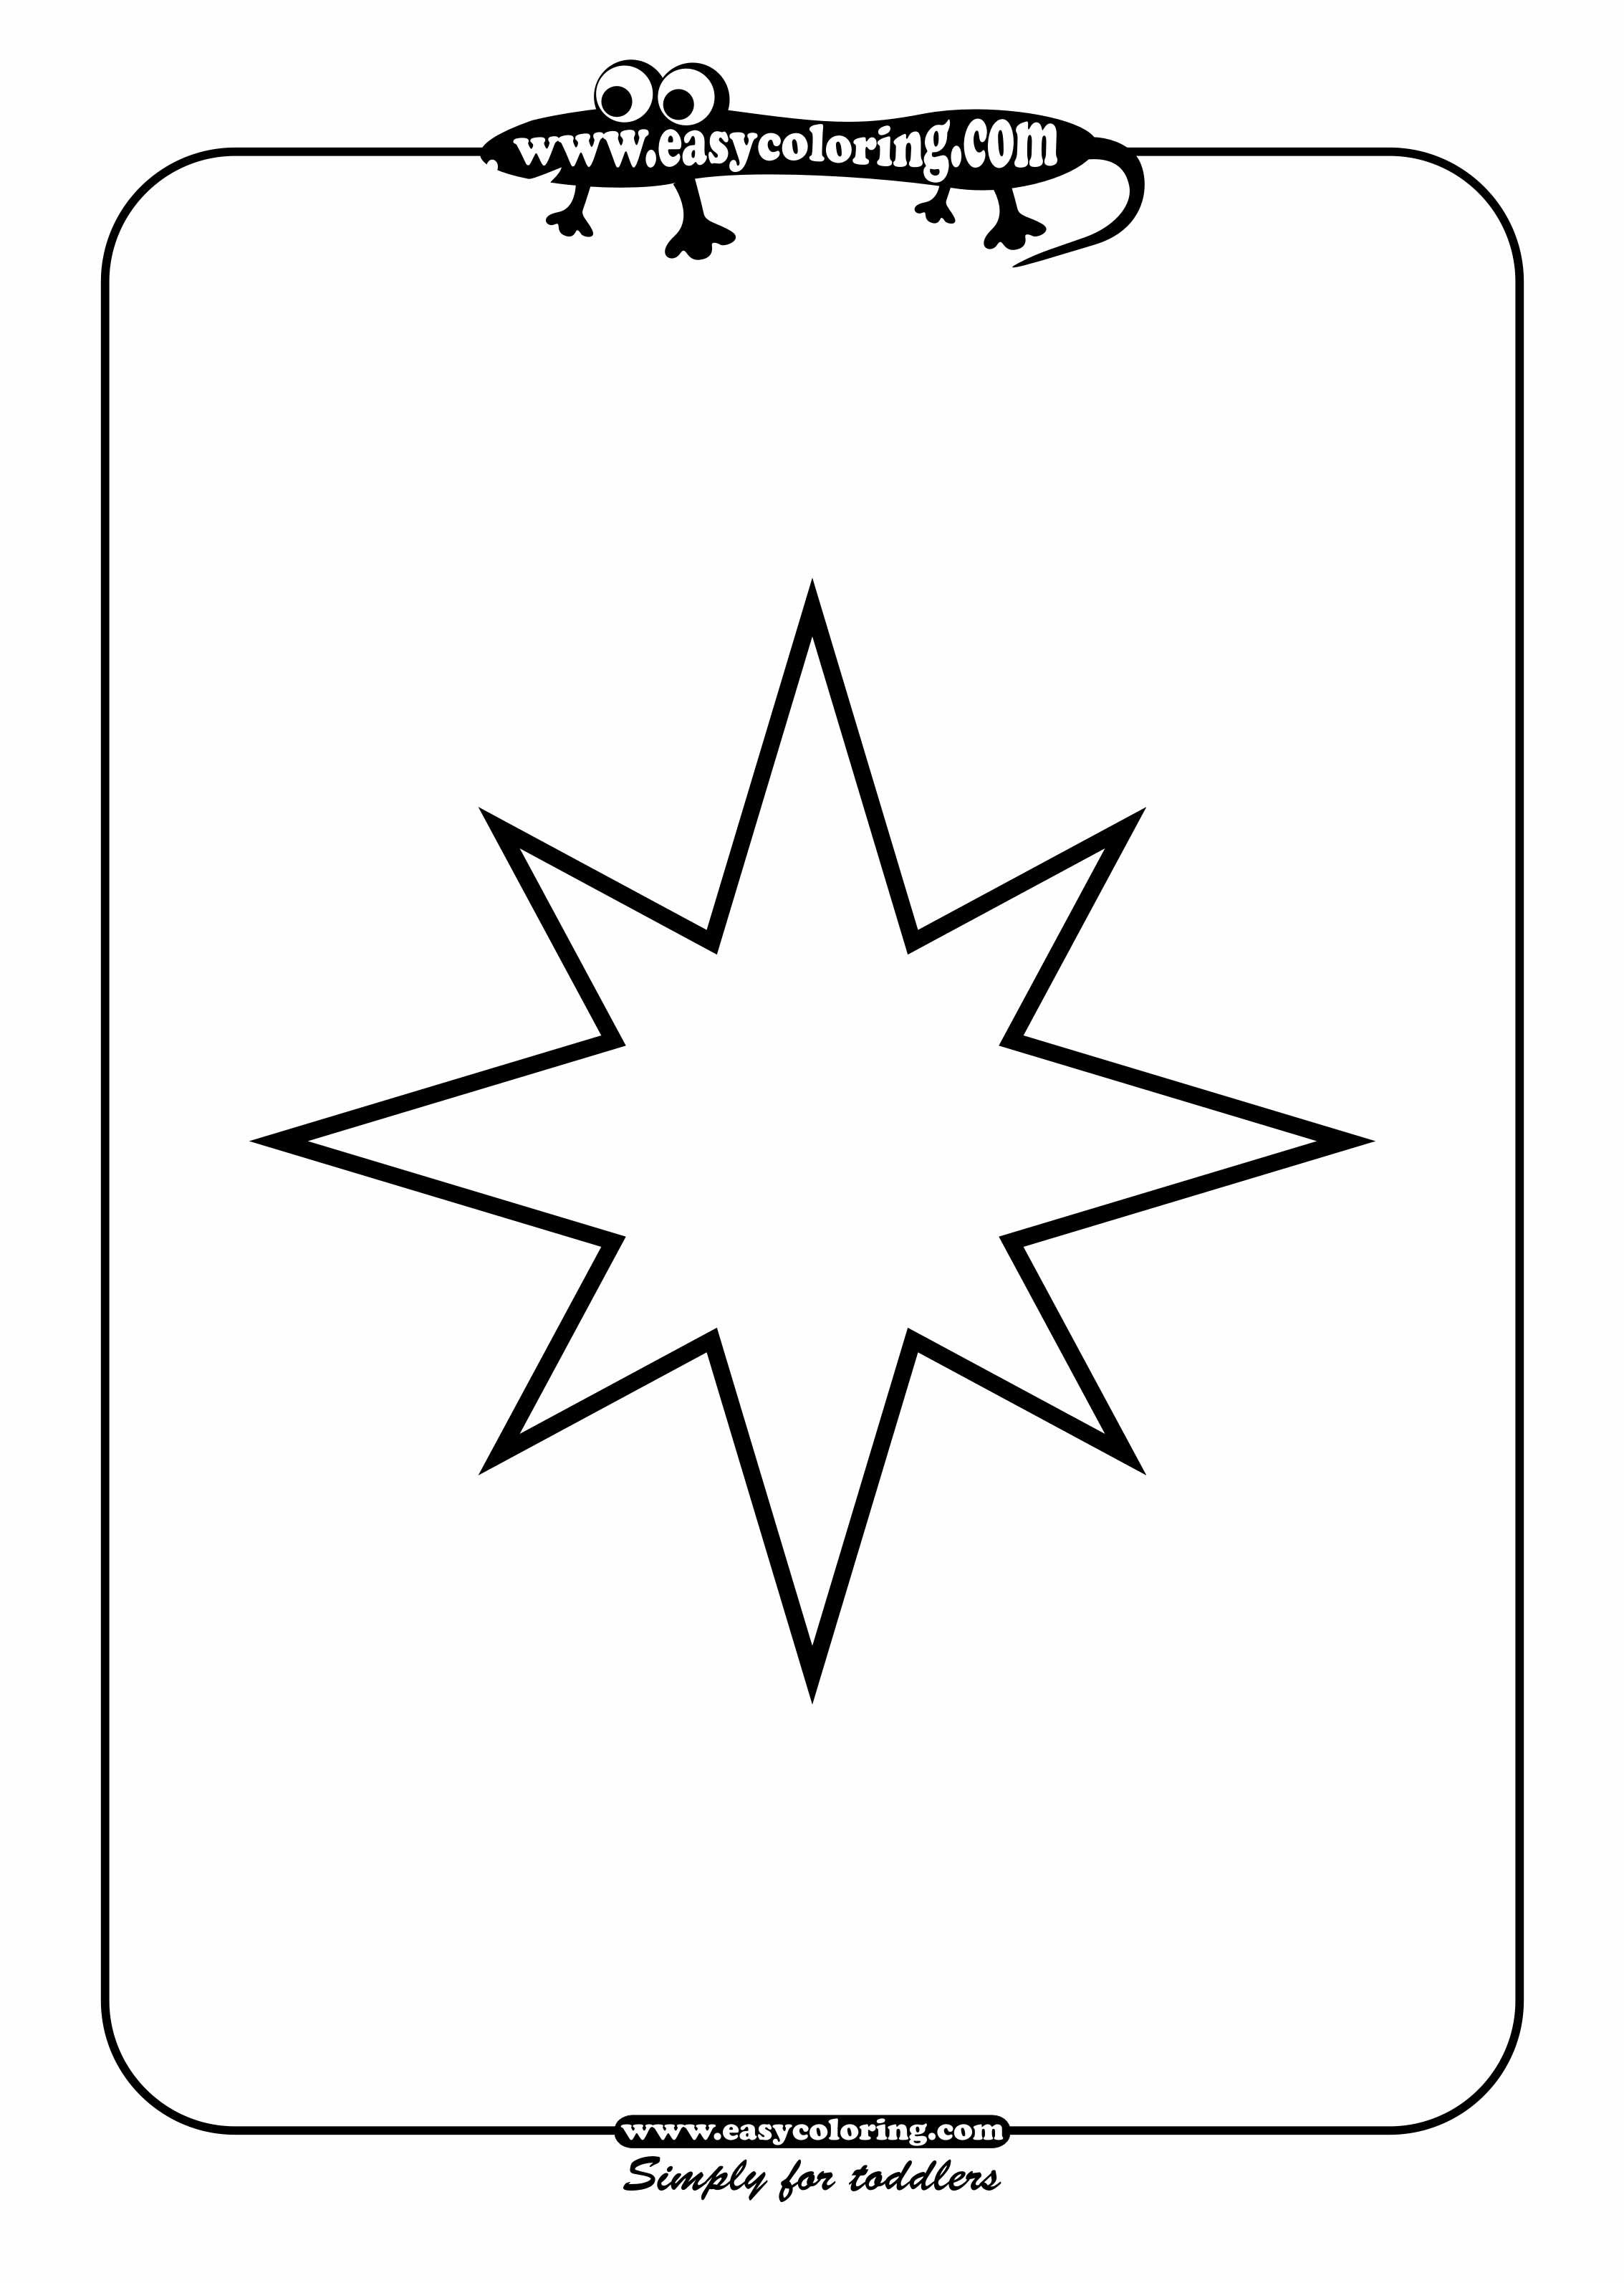 Star Simple shapes Easy coloring pages for toddlers